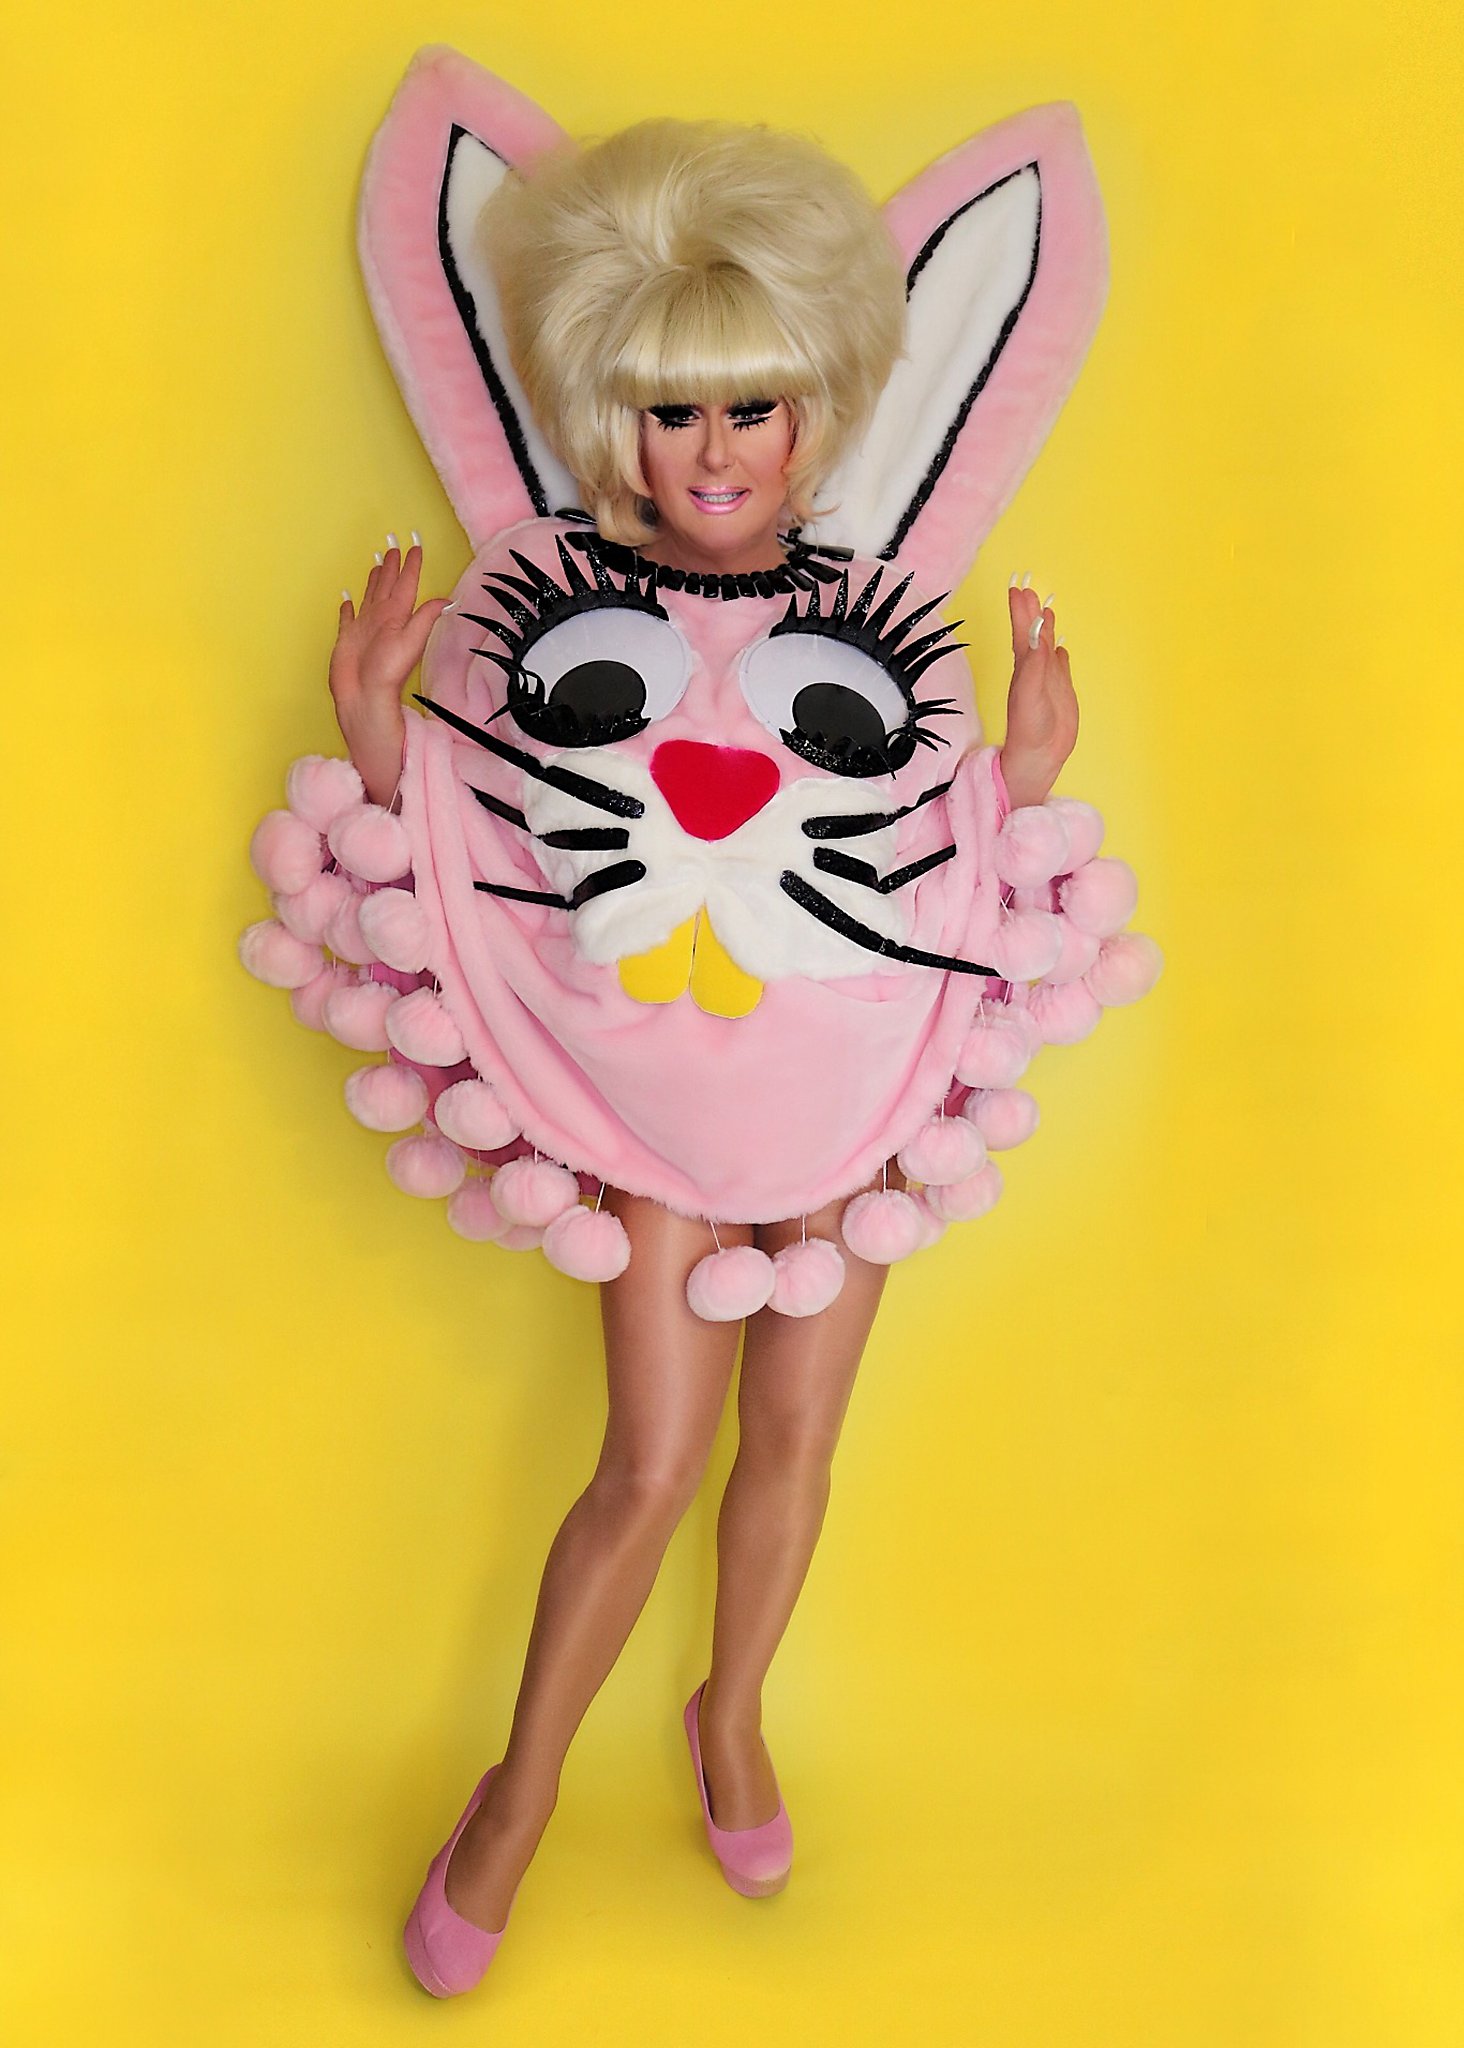 Lady Bunny brings low-down humor in high heels to SF - SFChronicle.com